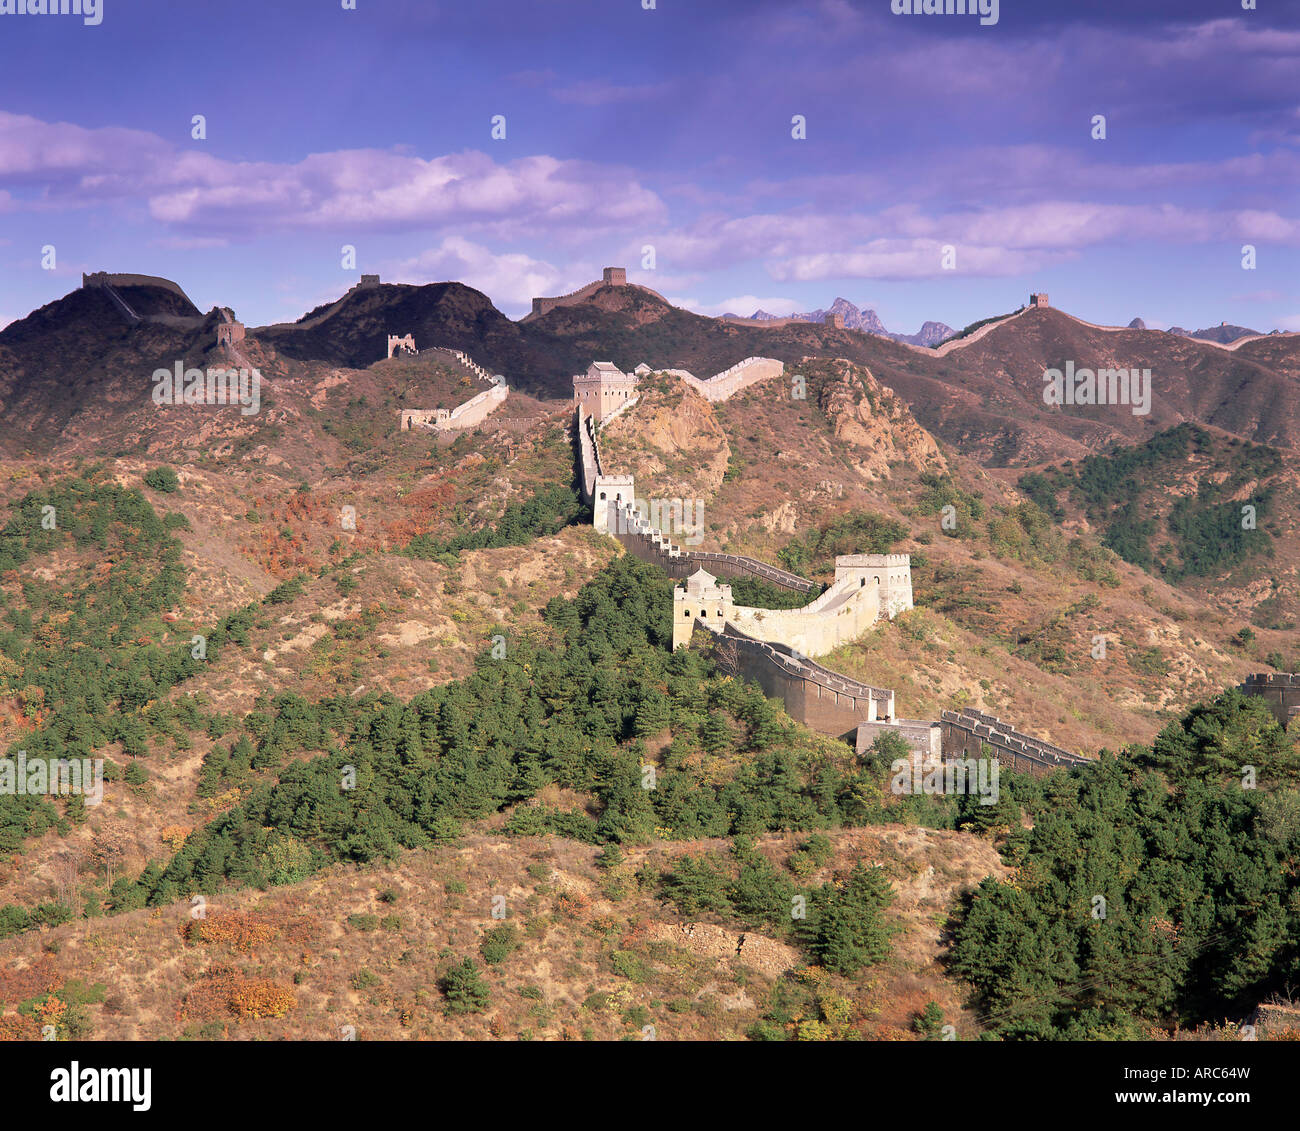 Jinshanling section, the Great Wall of China, UNESCO World Heritage Site, near Beijing, China, Asia Stock Photo